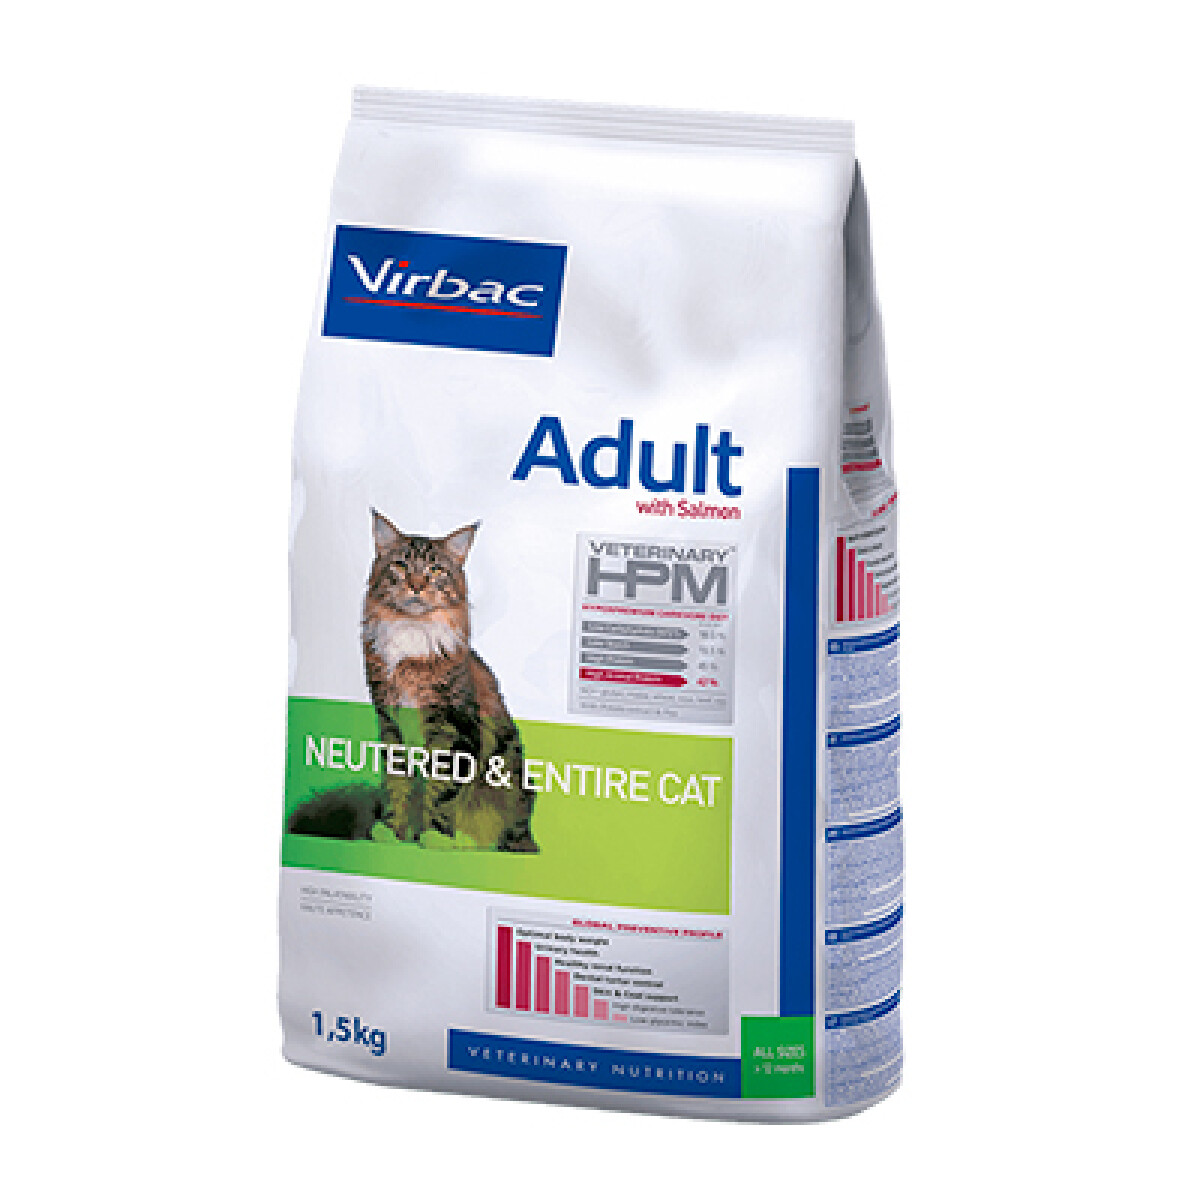 VIRBAC CAT ADULT WITH SALMON NEUTERED & ENTIRE 1,5KG - Unica 